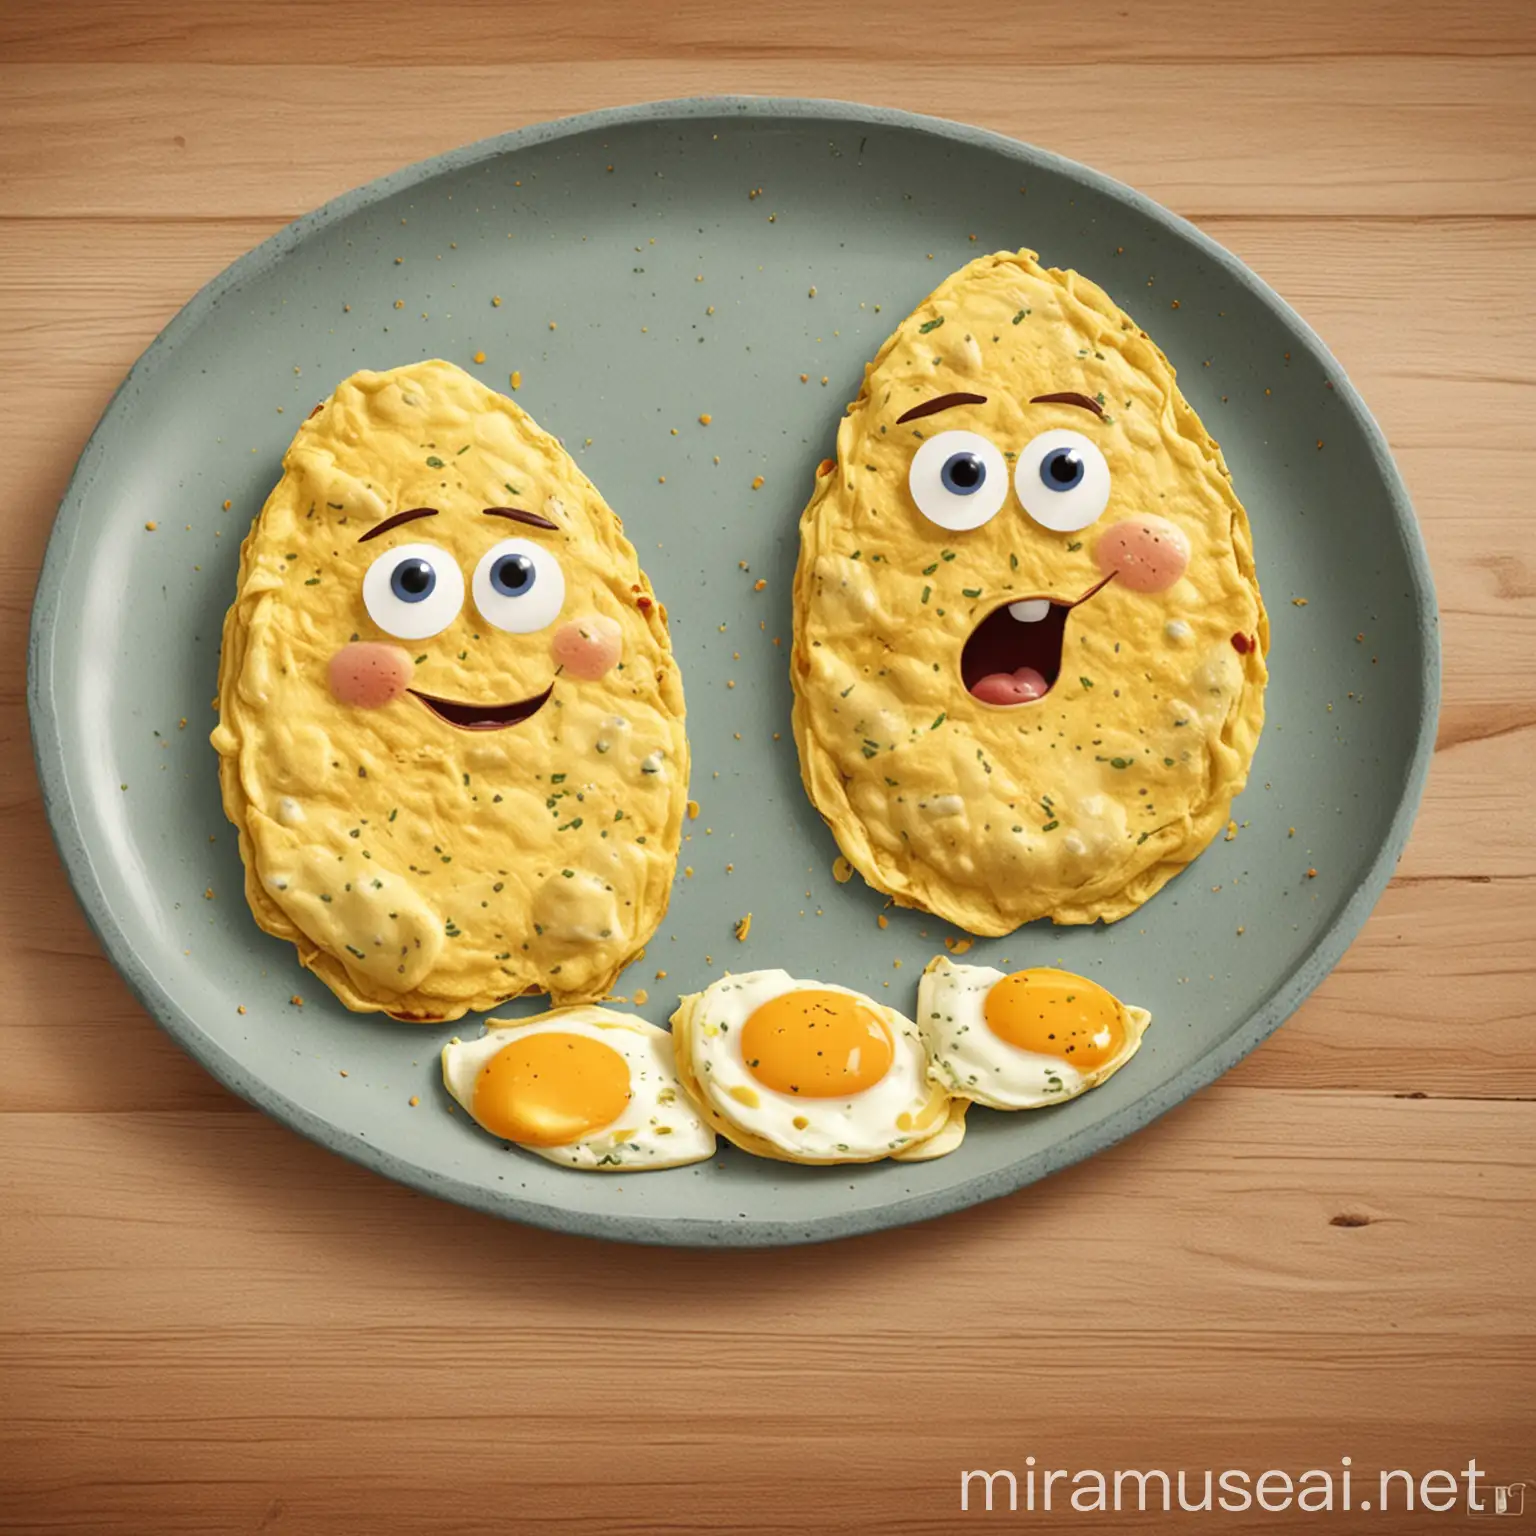 I want a cartoon that goes with the saying 'you can't make omelette without breaking eggs'